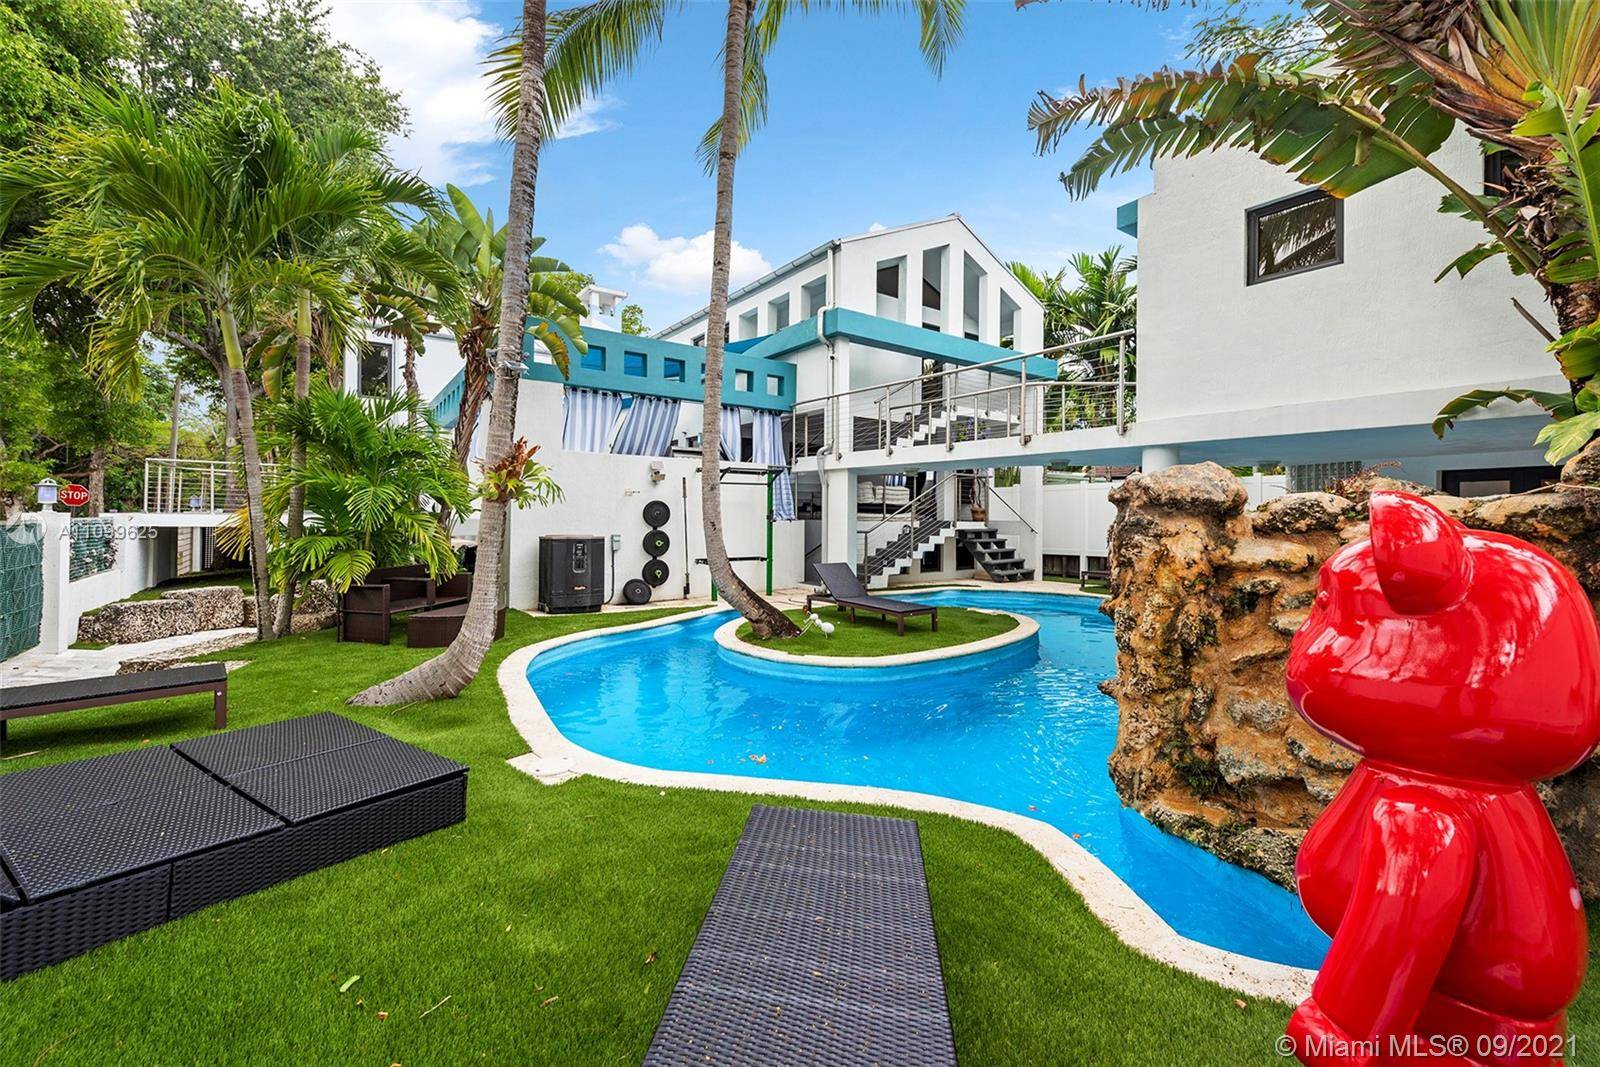 One of a kind Estate in the Heart of Coconut Grove.